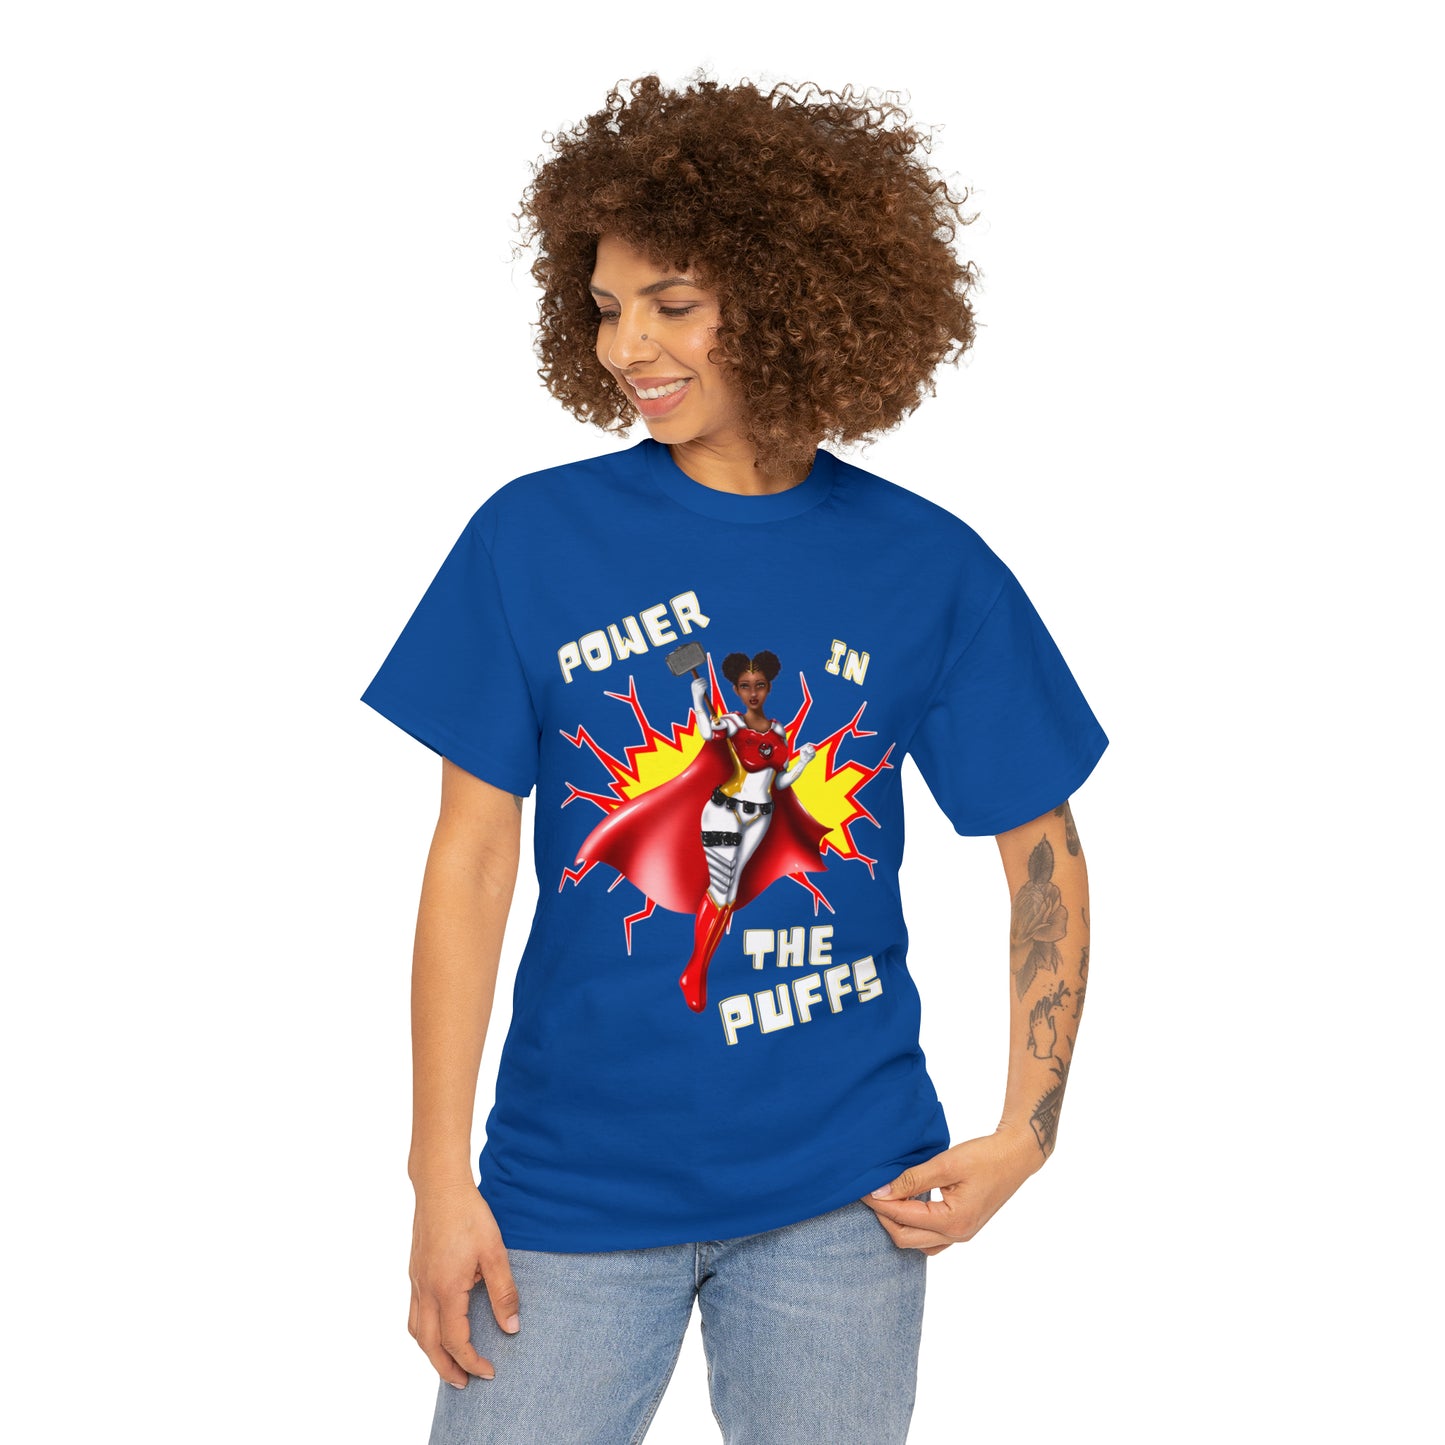 Power in the Puffs | Adult Unisex Heavy Cotton Tee | Superhero Fashion